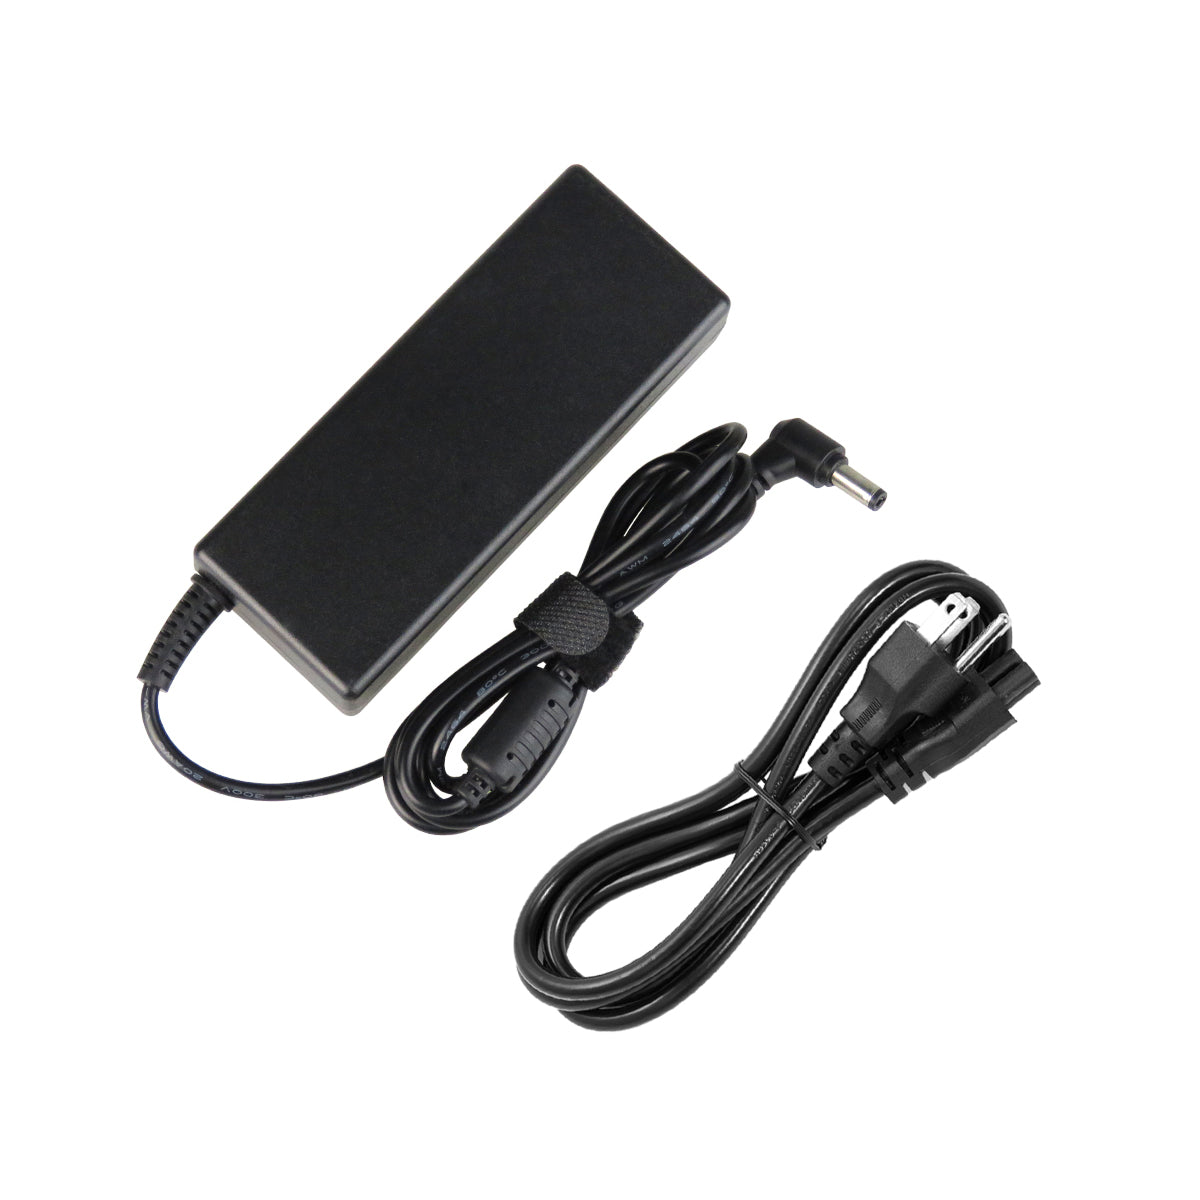 AC Adapter Charger for ASUS F75A Notebook.